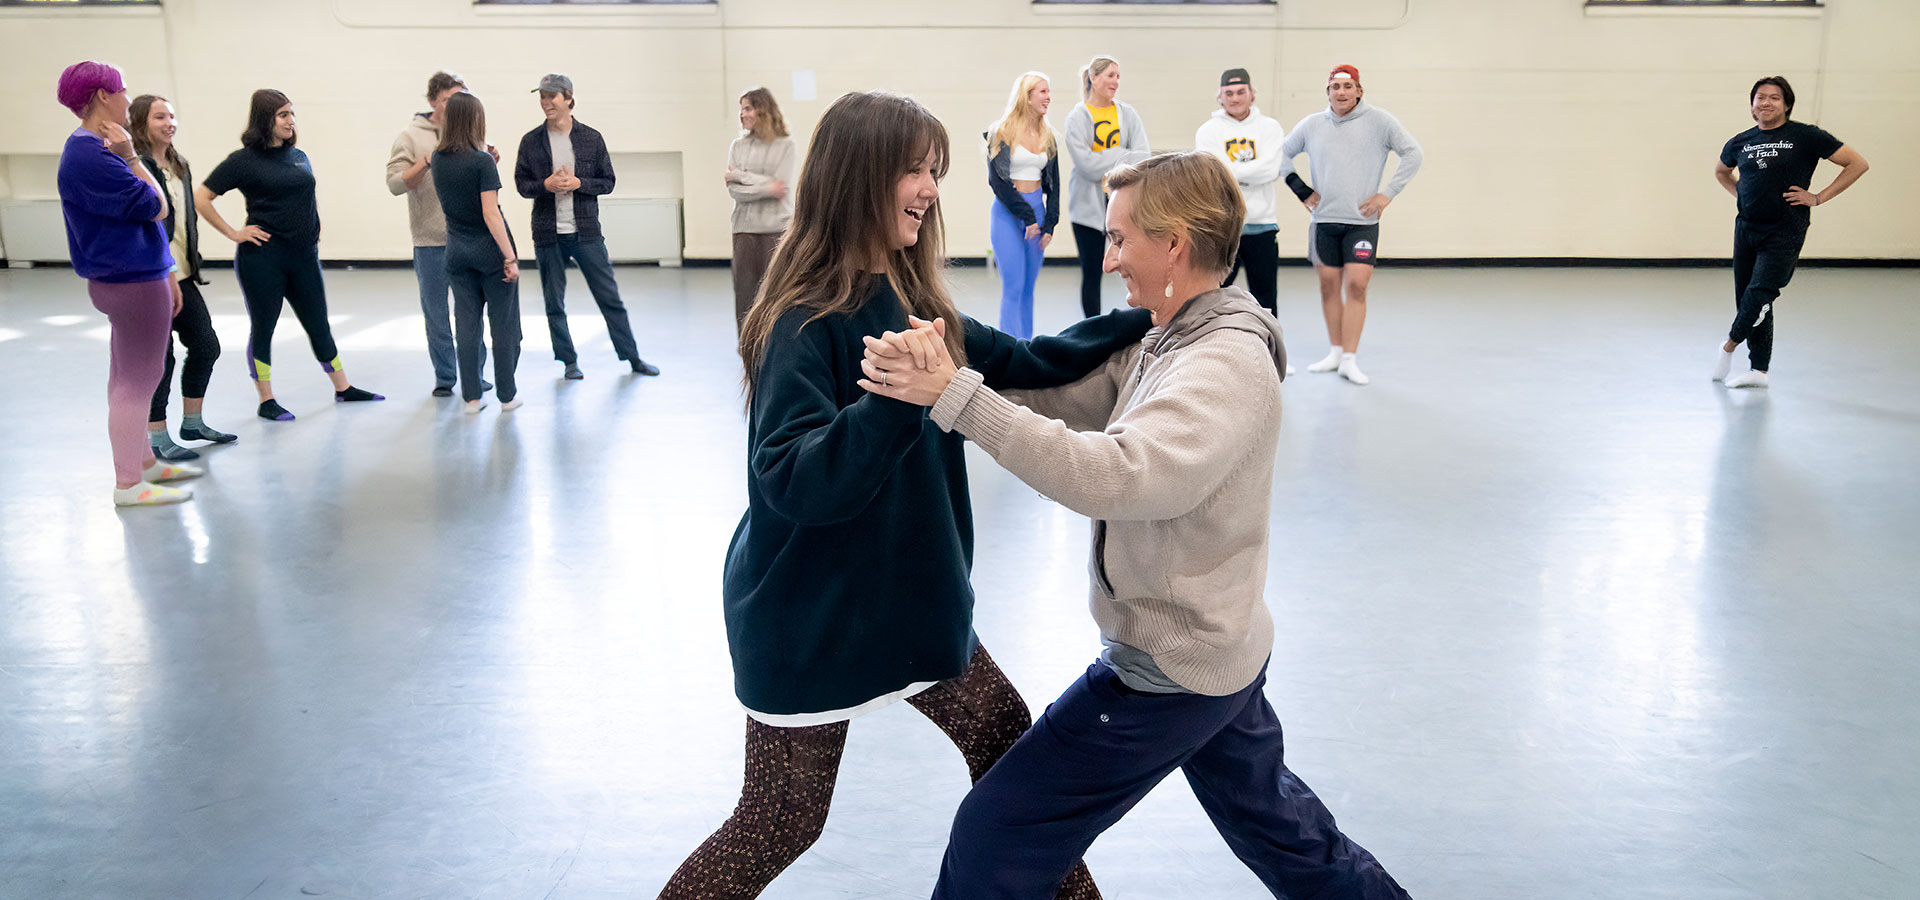 Rachel Boardman ’25 dances the waltz with Professor  during the Body in Motion class (), which includes sometimes dance, other times mind/body exercises, on Monday, April 18, 2022 at the Cossitt Gym. Photo by Lonnie Timmons III